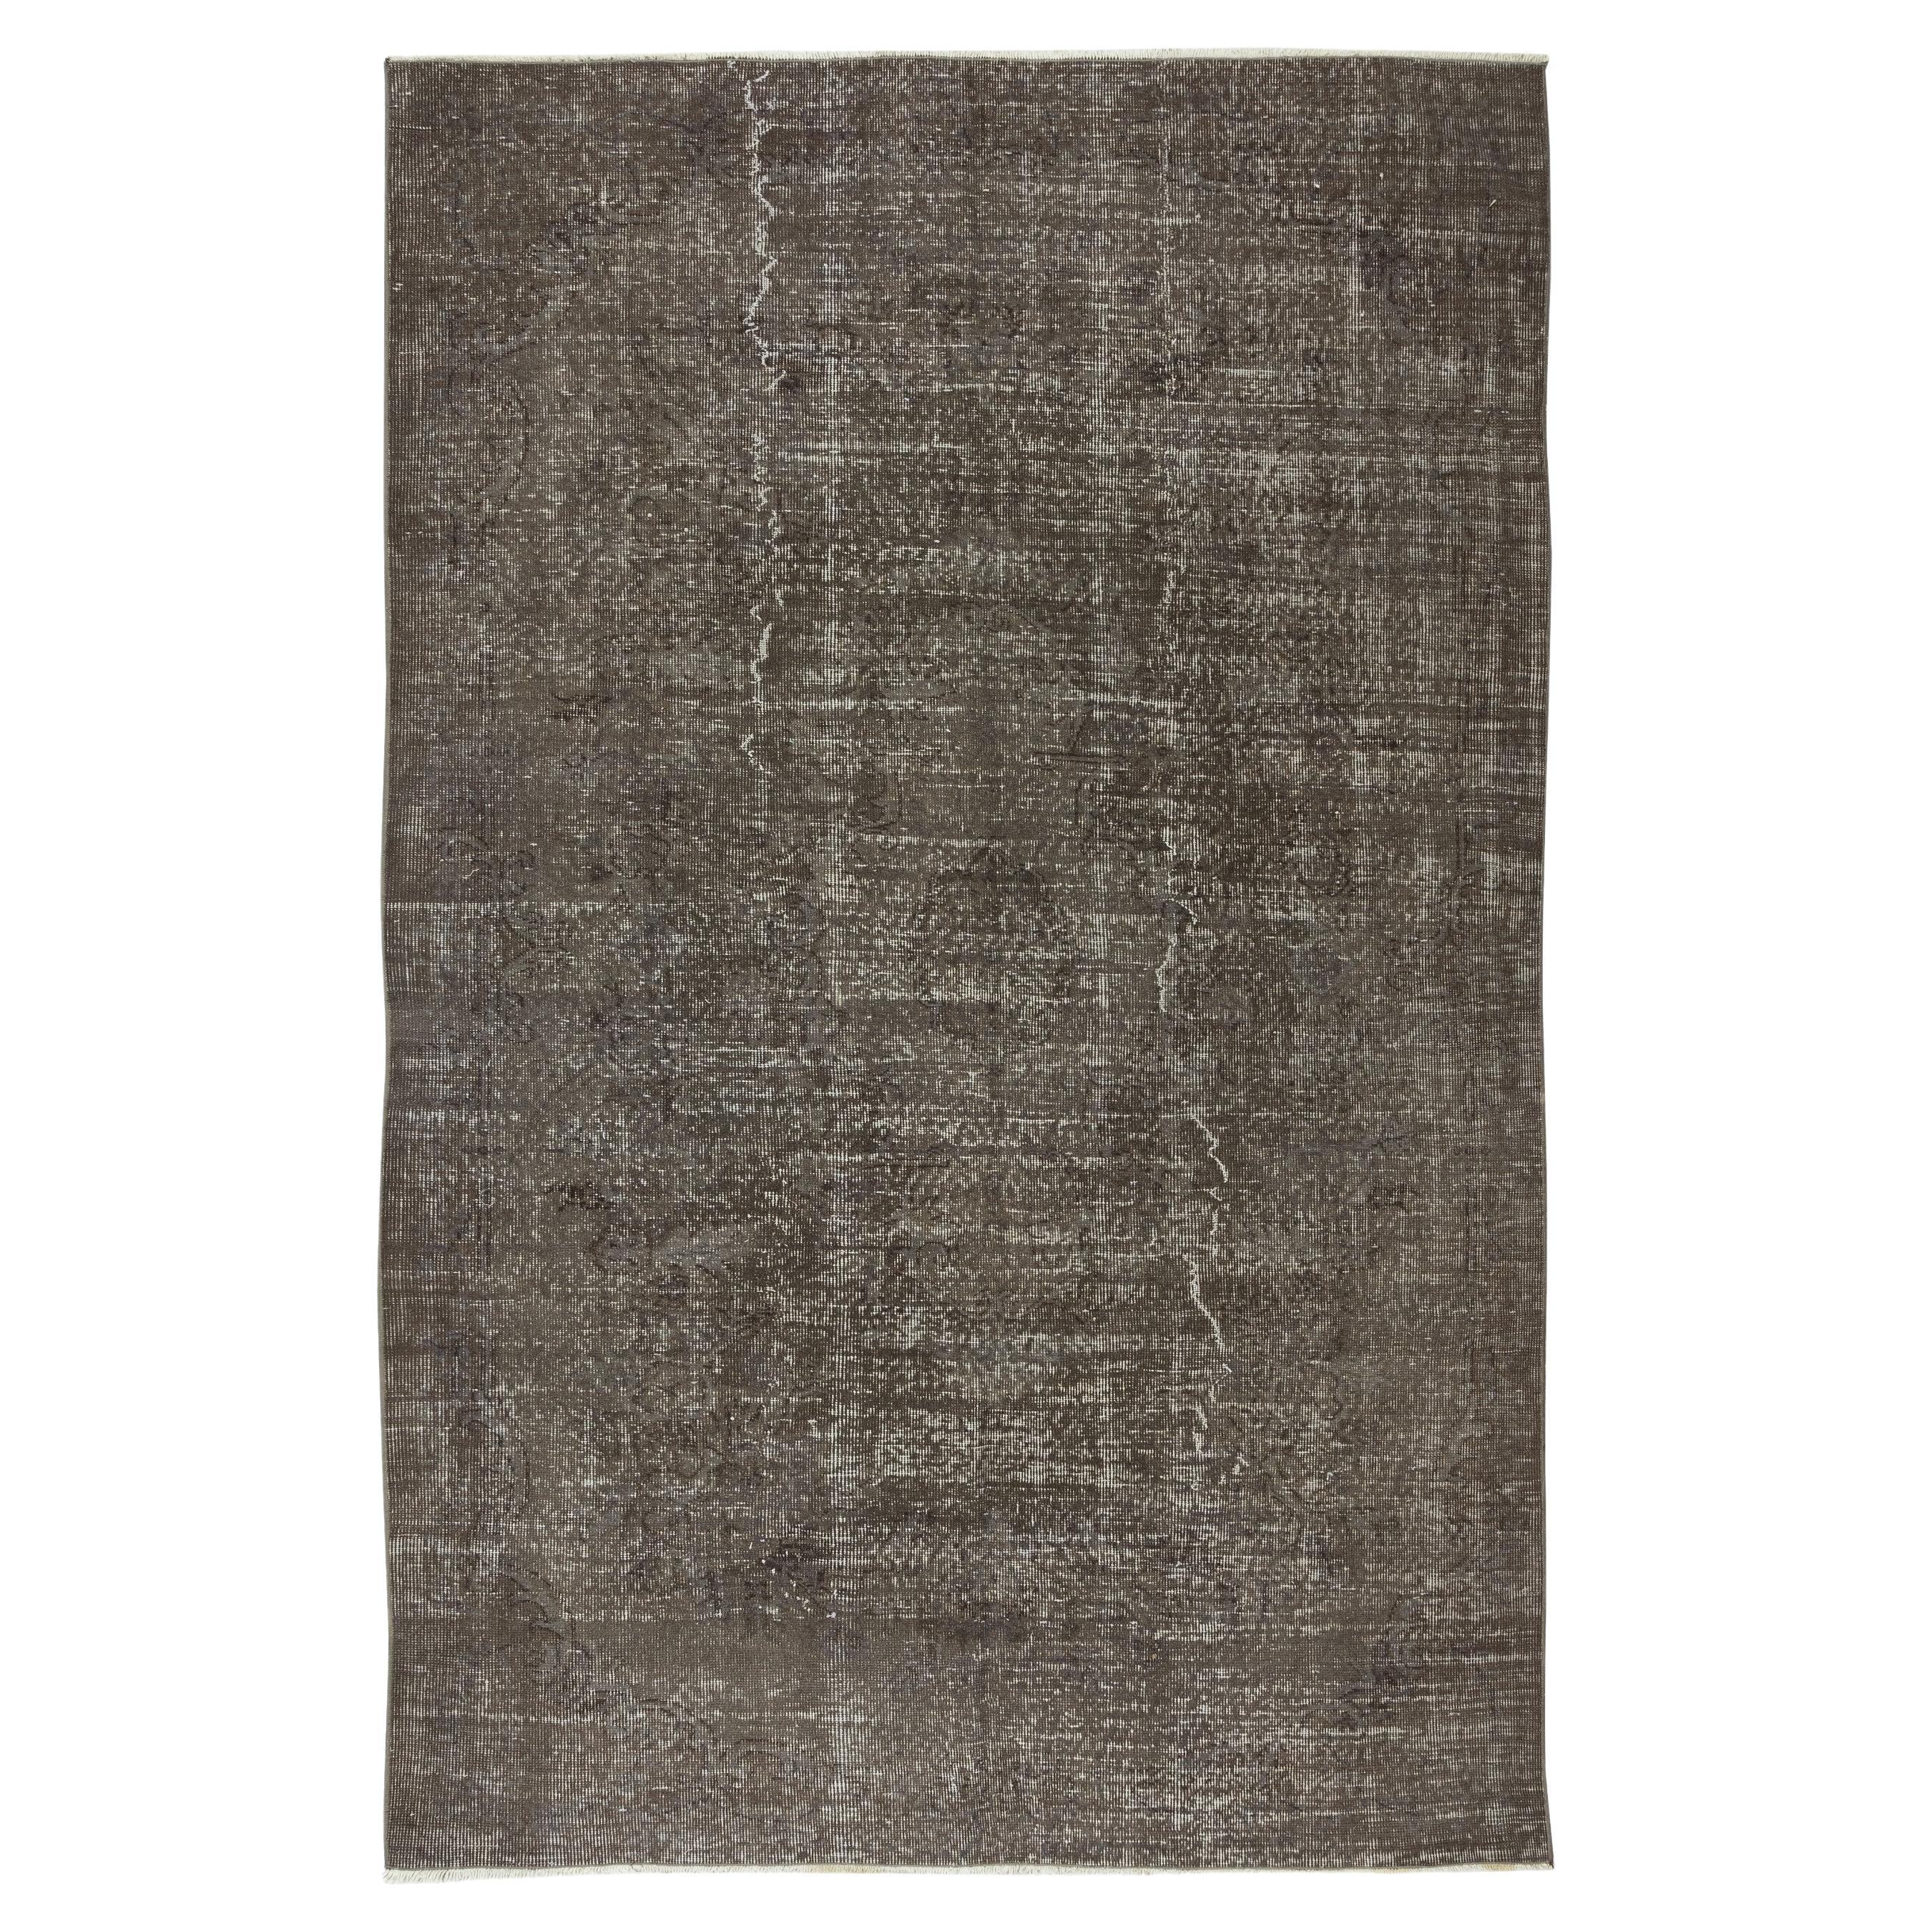 Contemporary Turkish Rug ReDyed in Gray, Vintage Handmade Wool Carpet For Sale